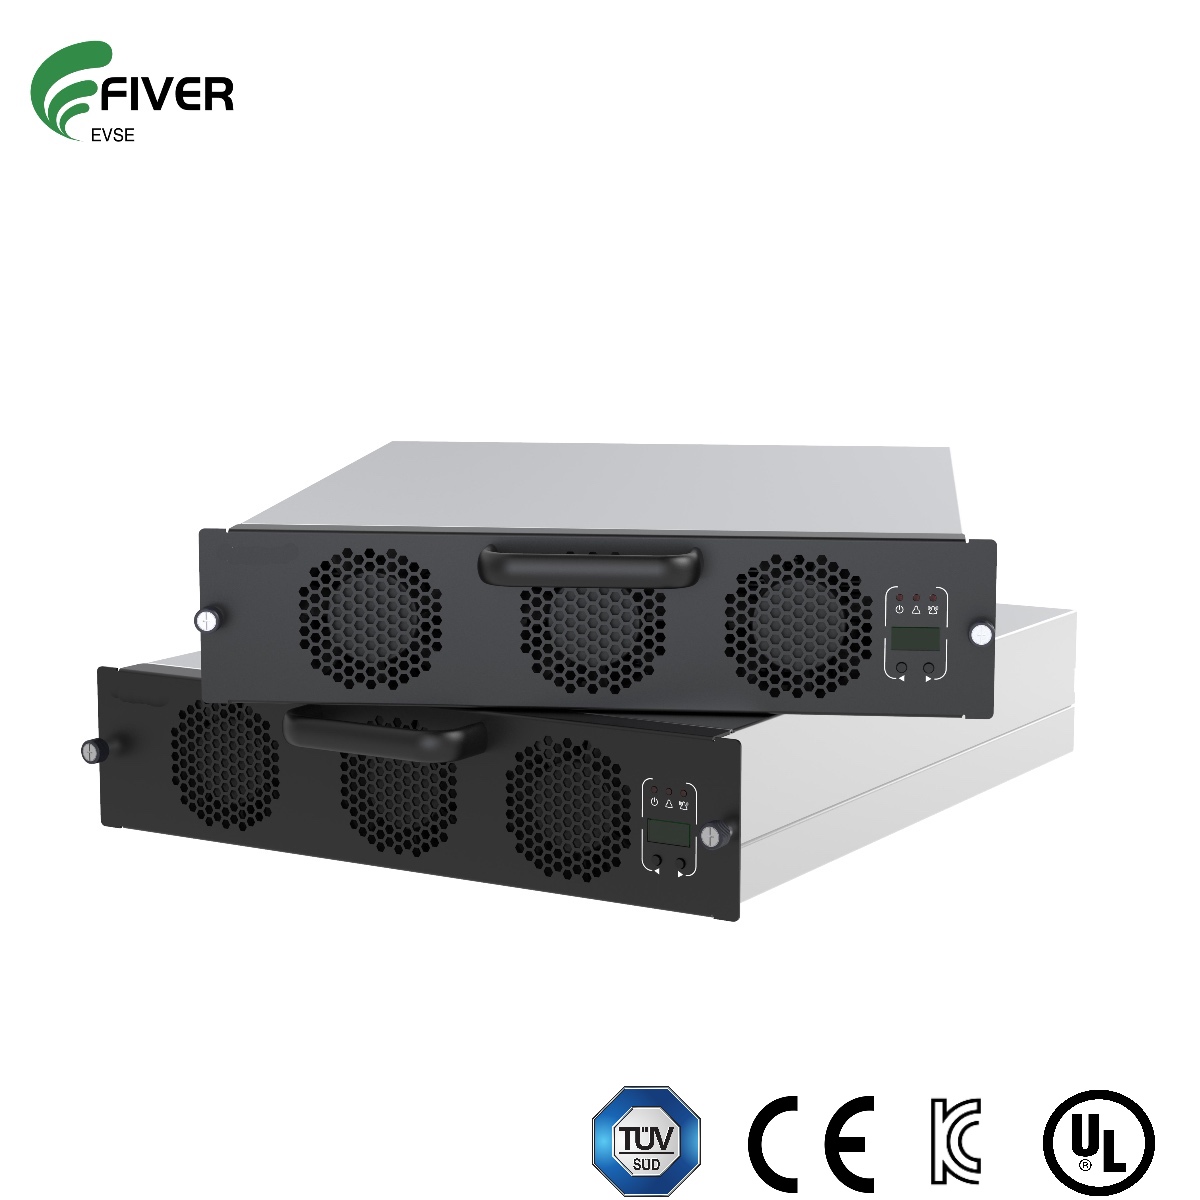 40KW Ultra wide input & Output High Power Density High Efficiency 40KW Power Module for EV Charging